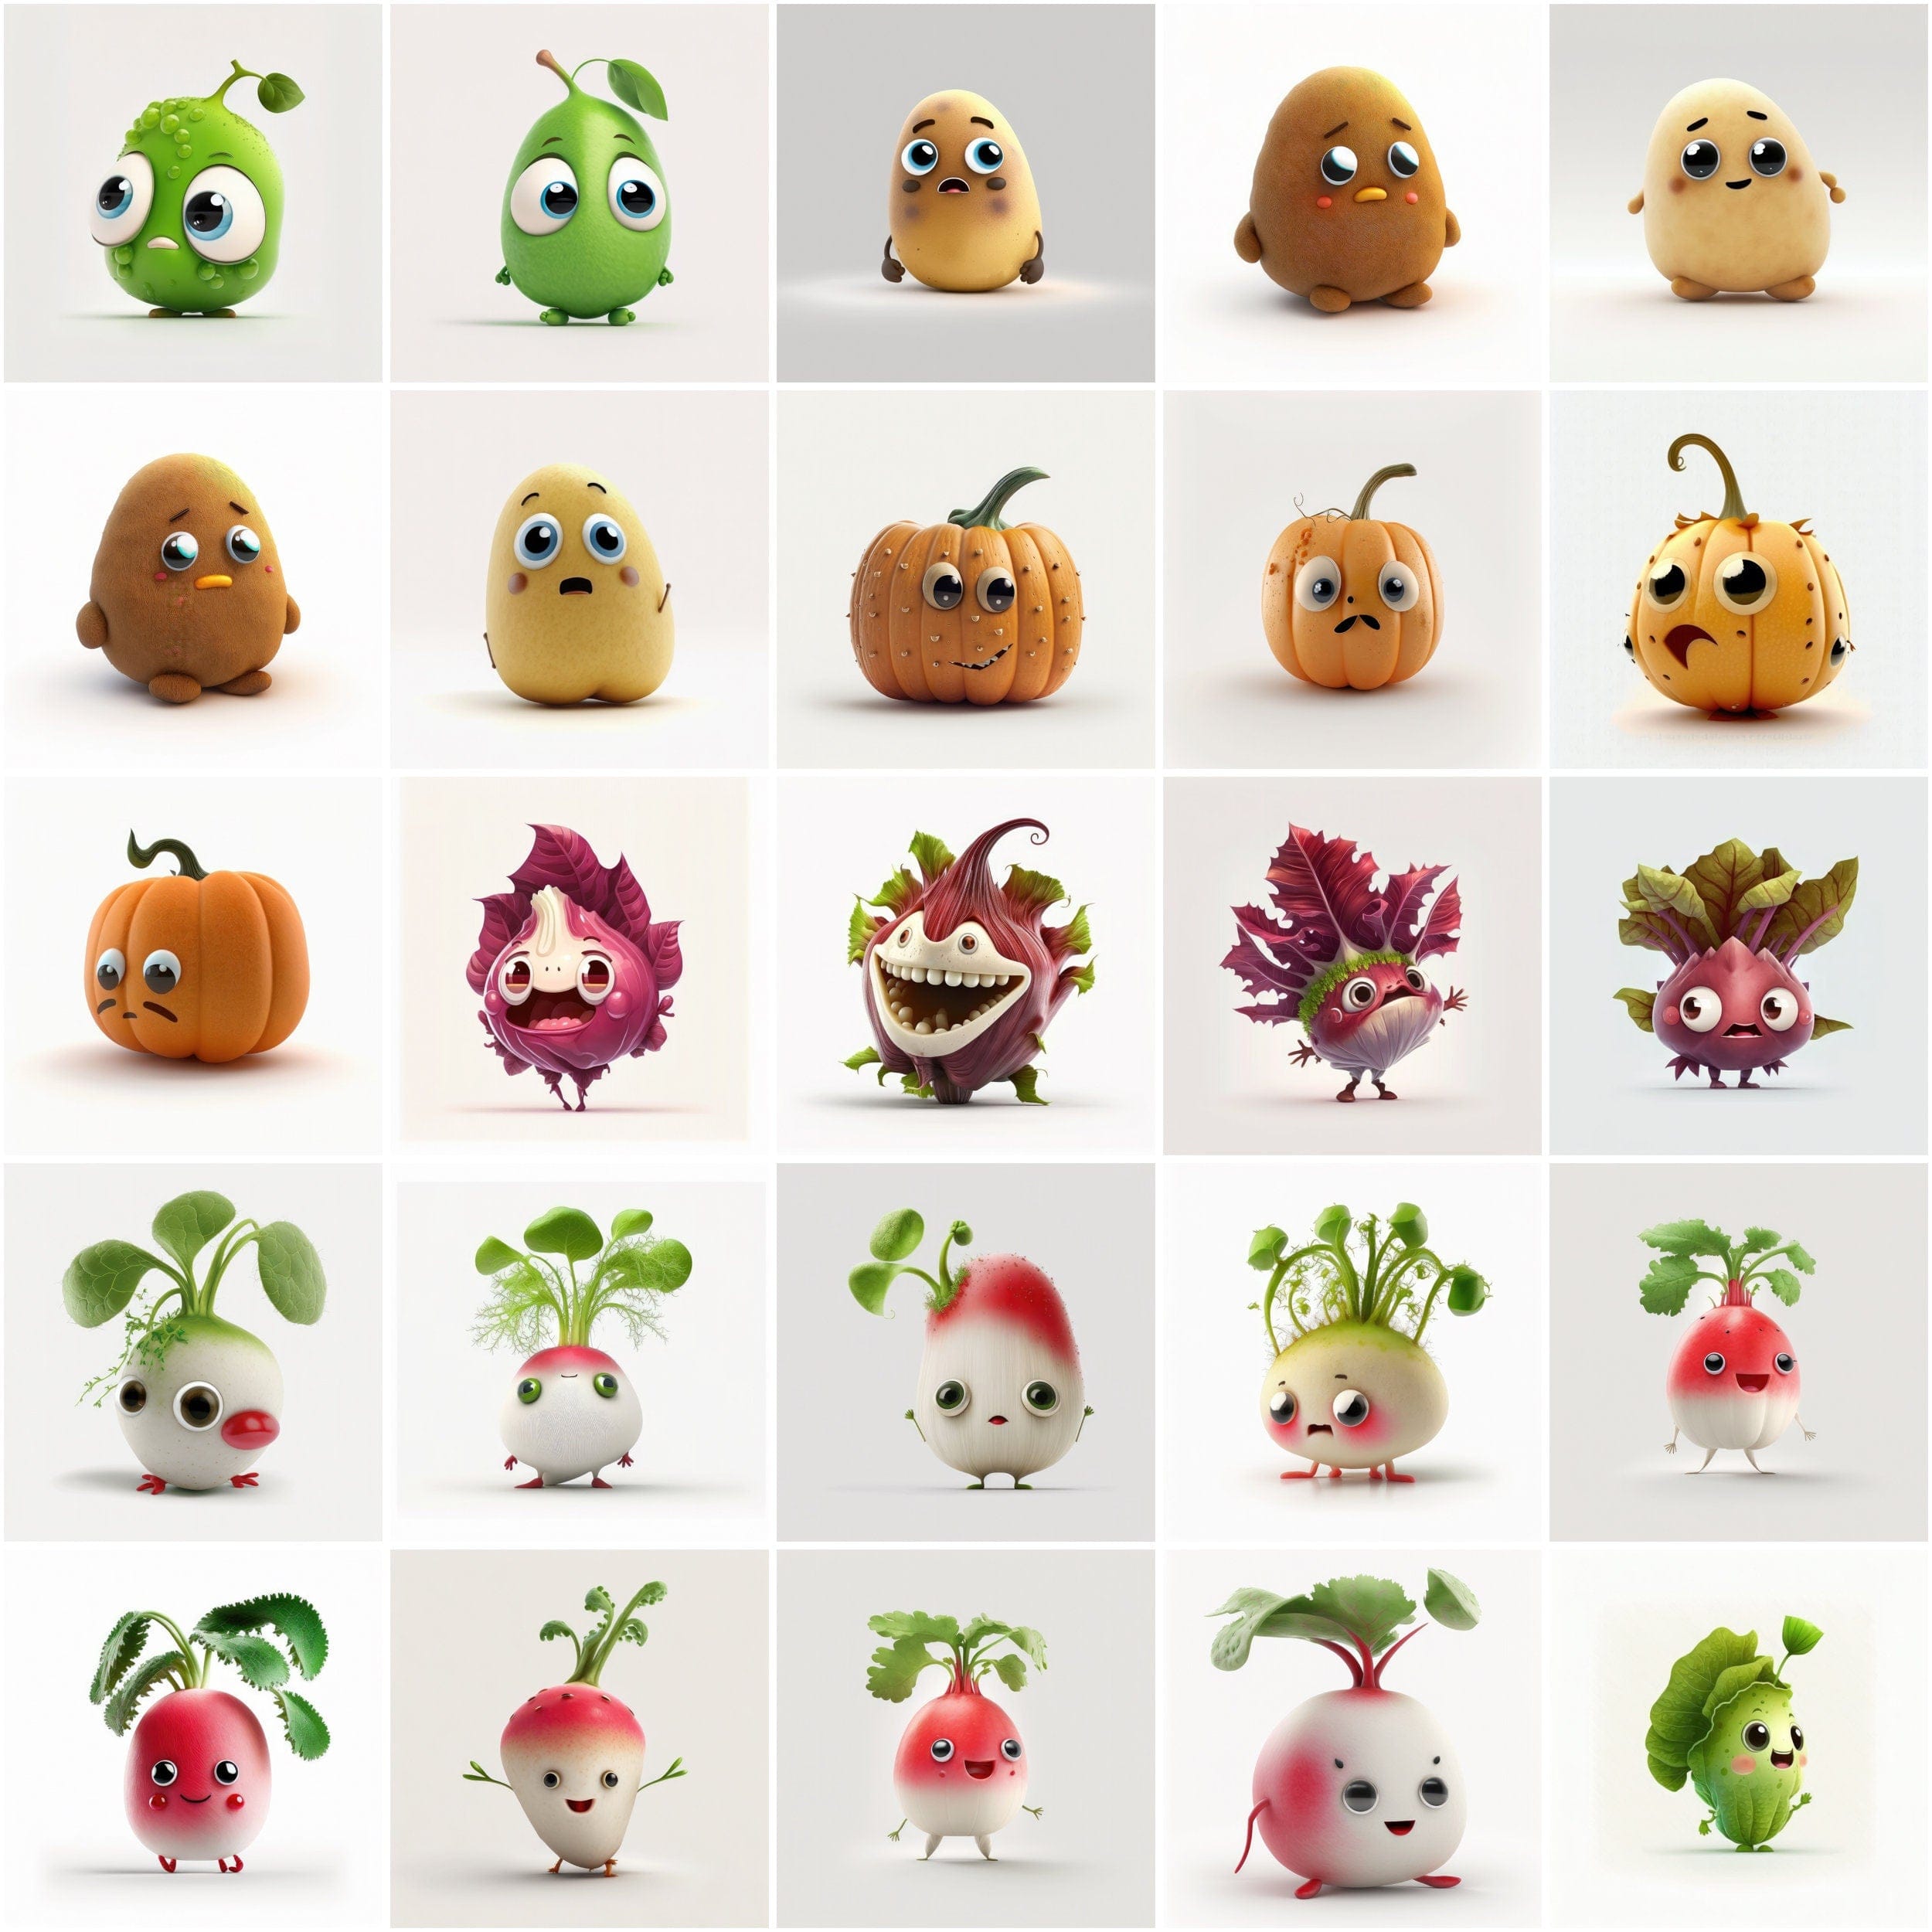 Bundle of 200+ Funny Vegetable Images with No Background and Shadow Background, Humorous Vegetable Images - Perfect for Posters, Stickers Digital Download Sumobundle